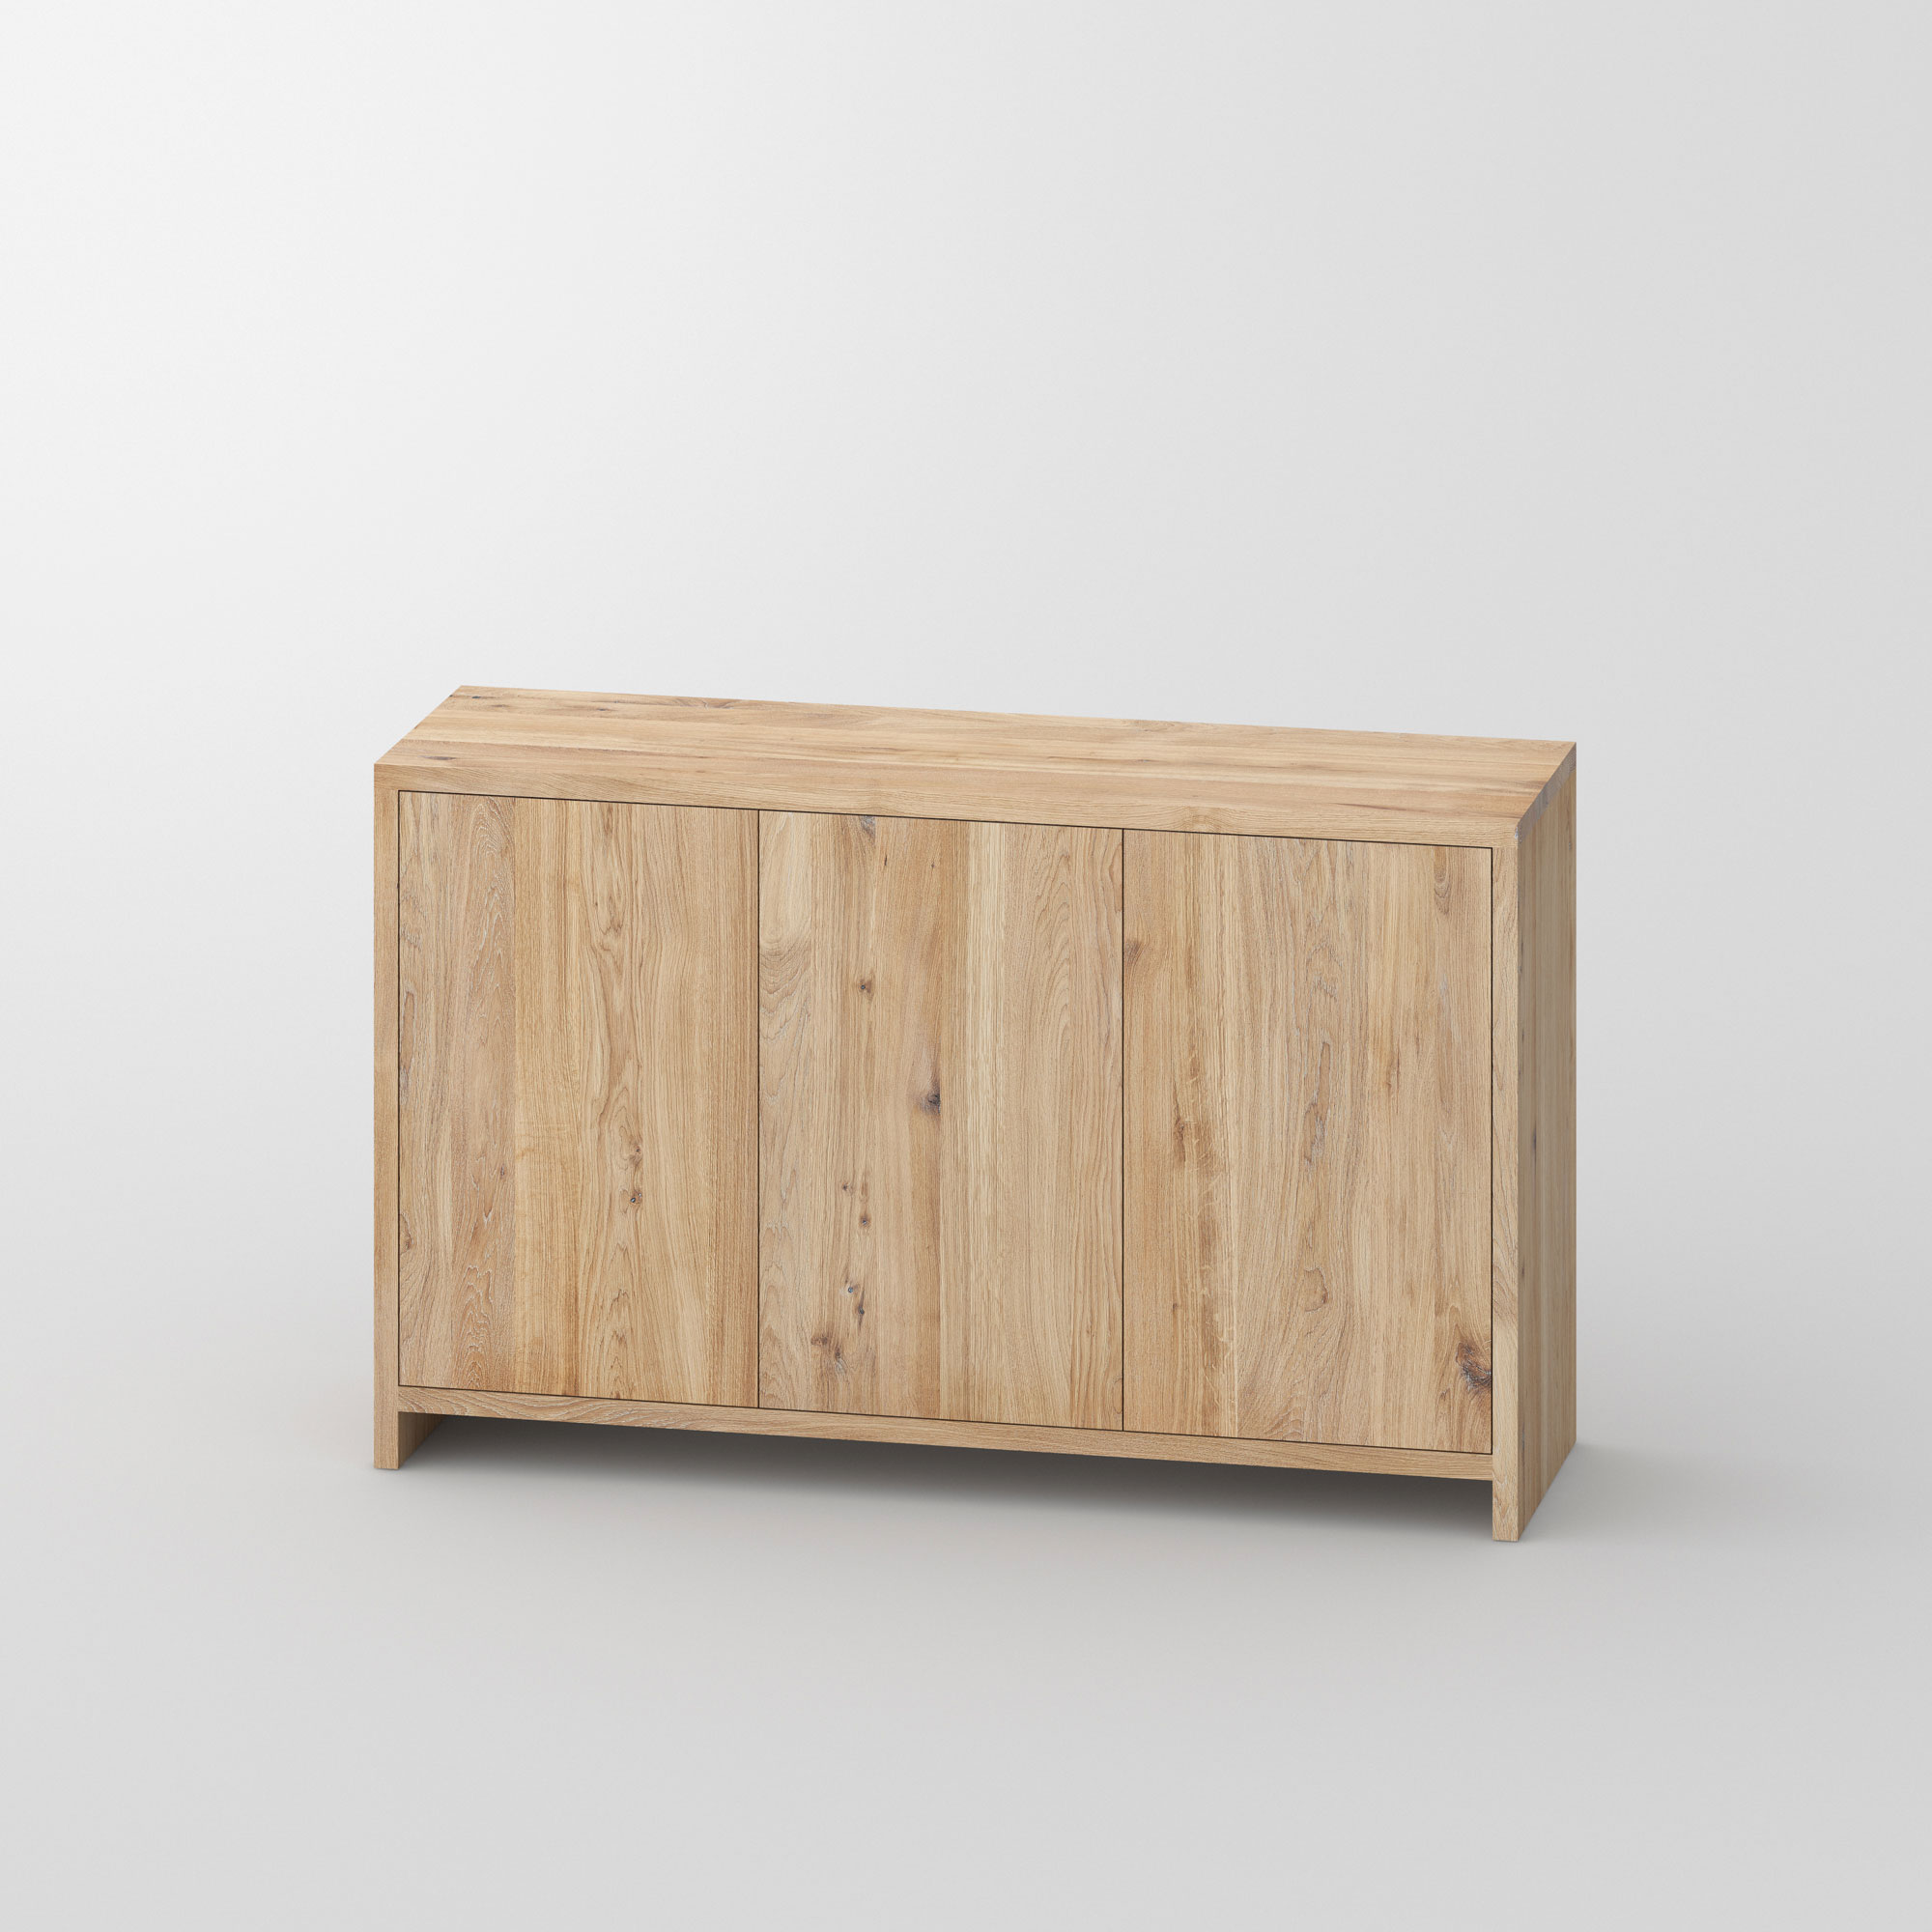 Tailor-Made Sideboard MENA F cam1 custom made in solid wood by vitamin design